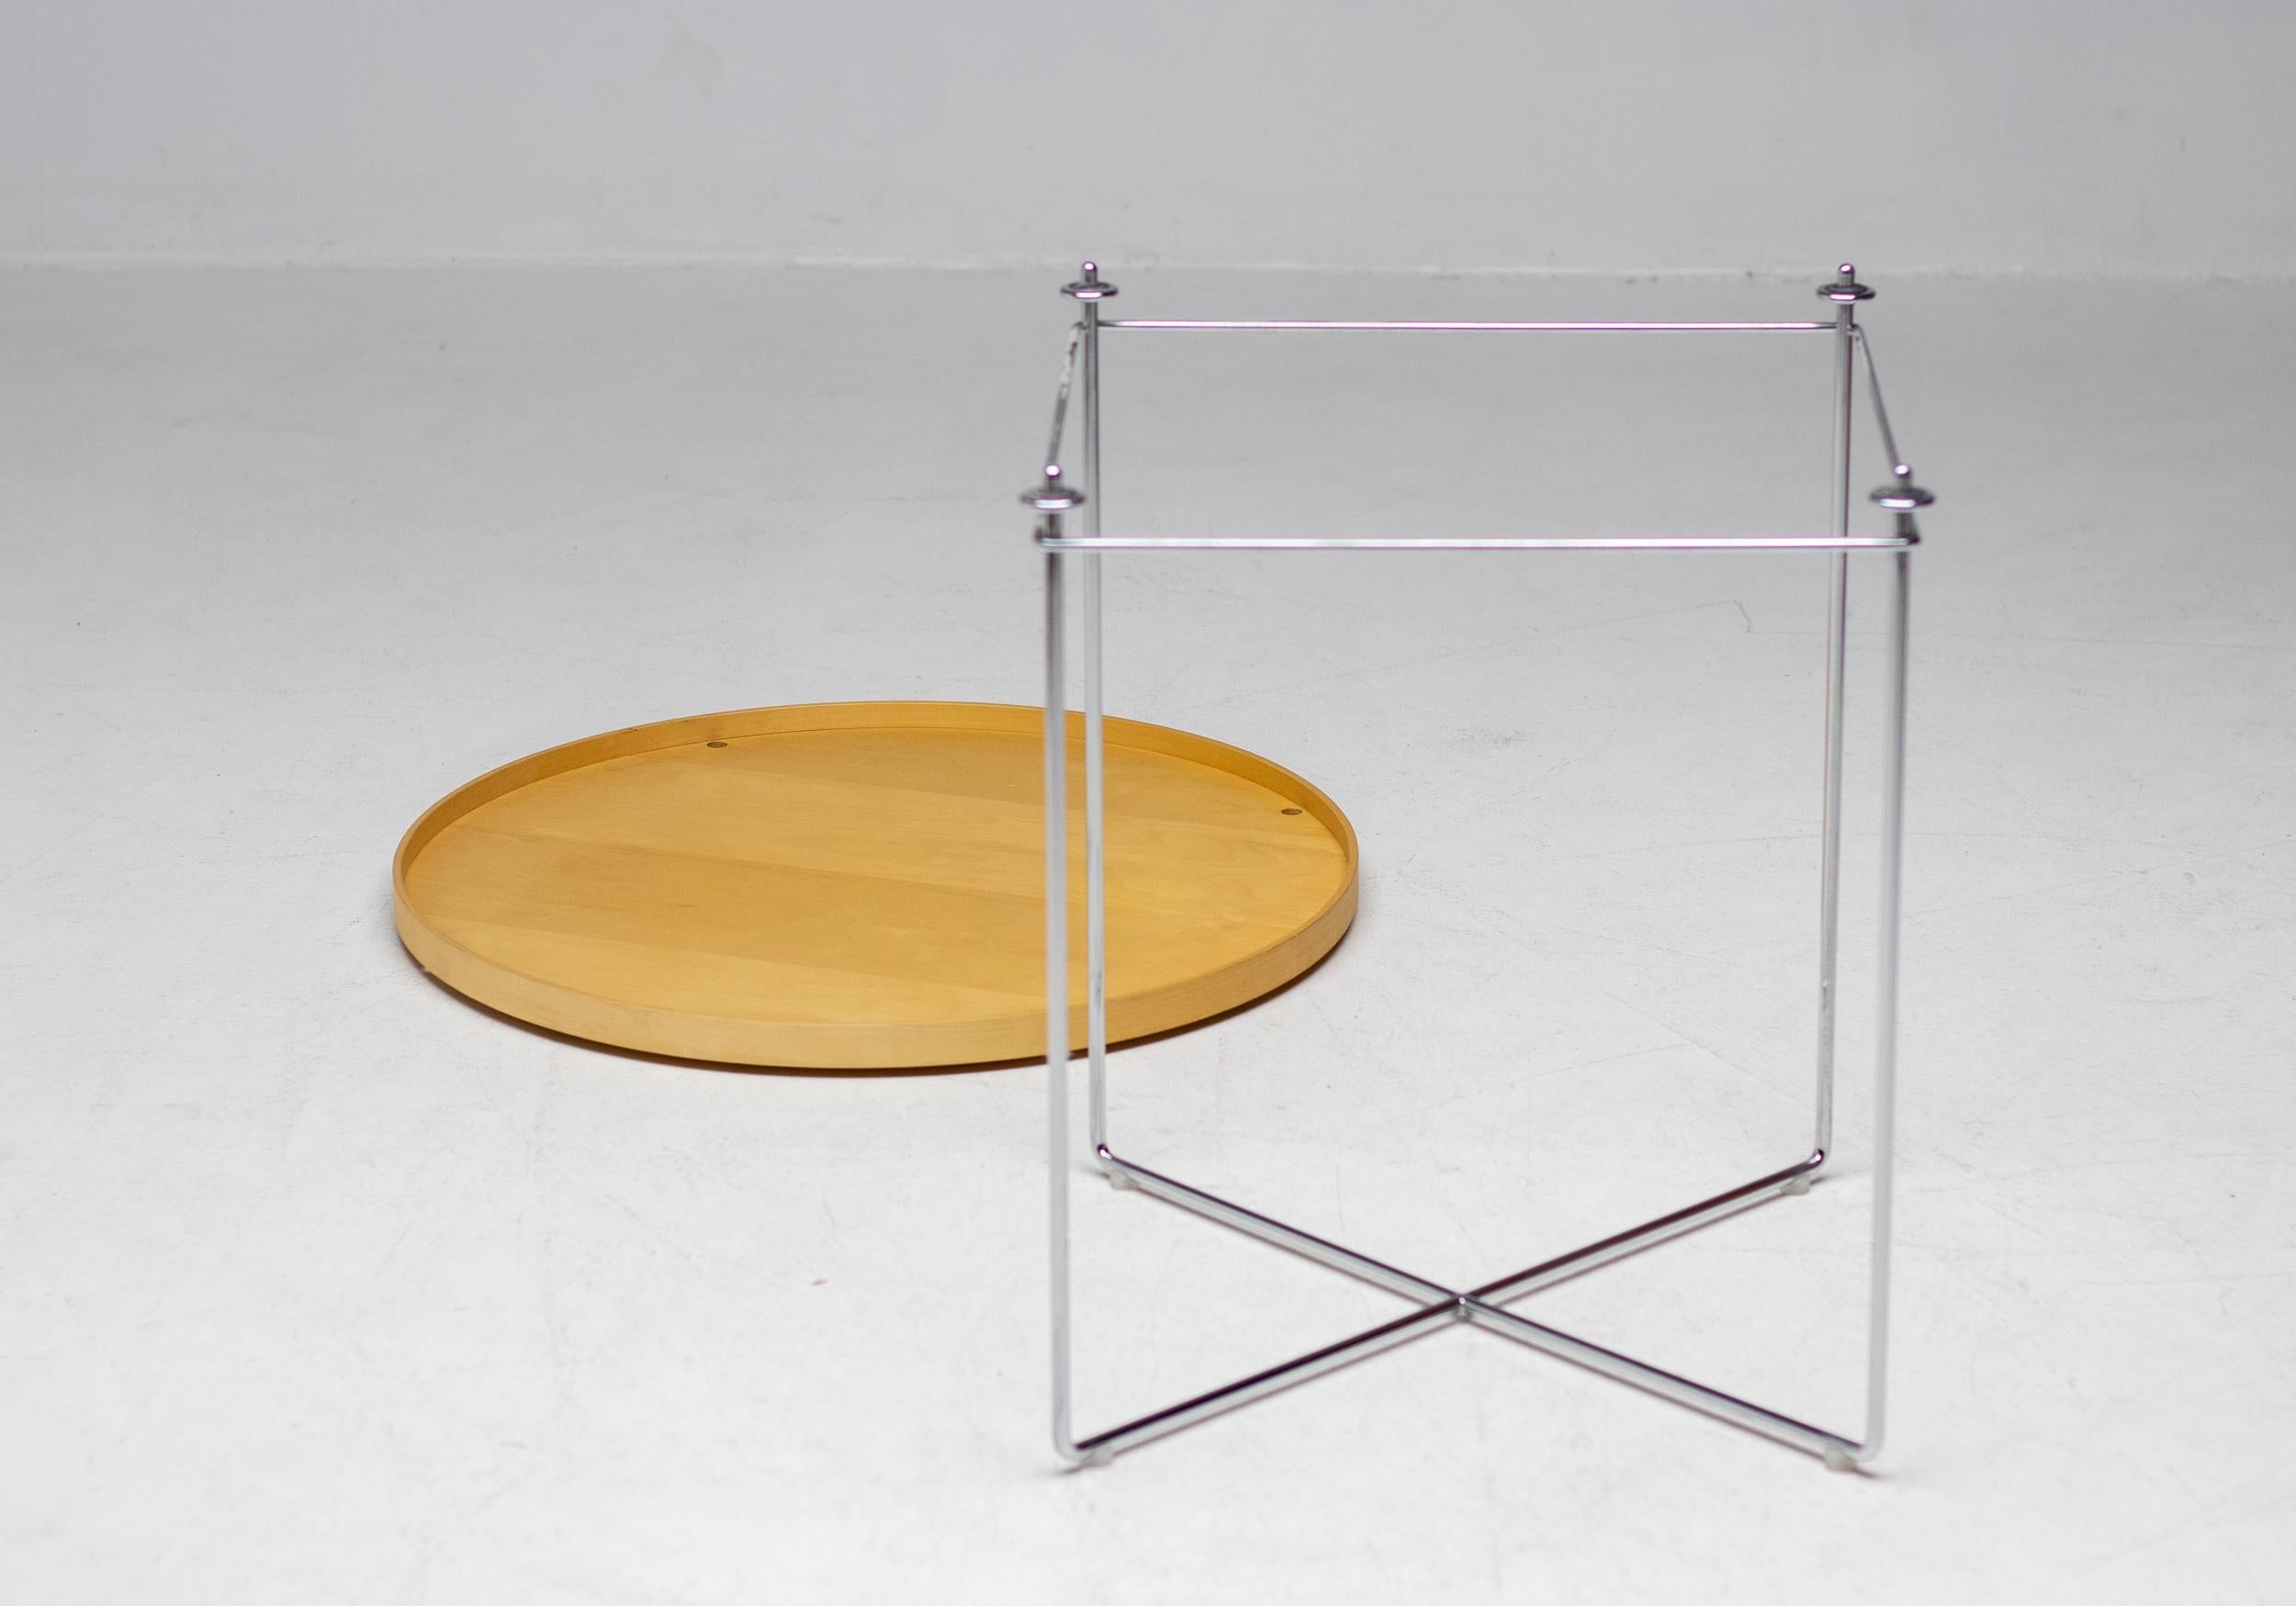 Elegant and very practical tray table in ash plywood with a chromed steel frame.
Made by Leolux, The Netherlands. Marked with label.